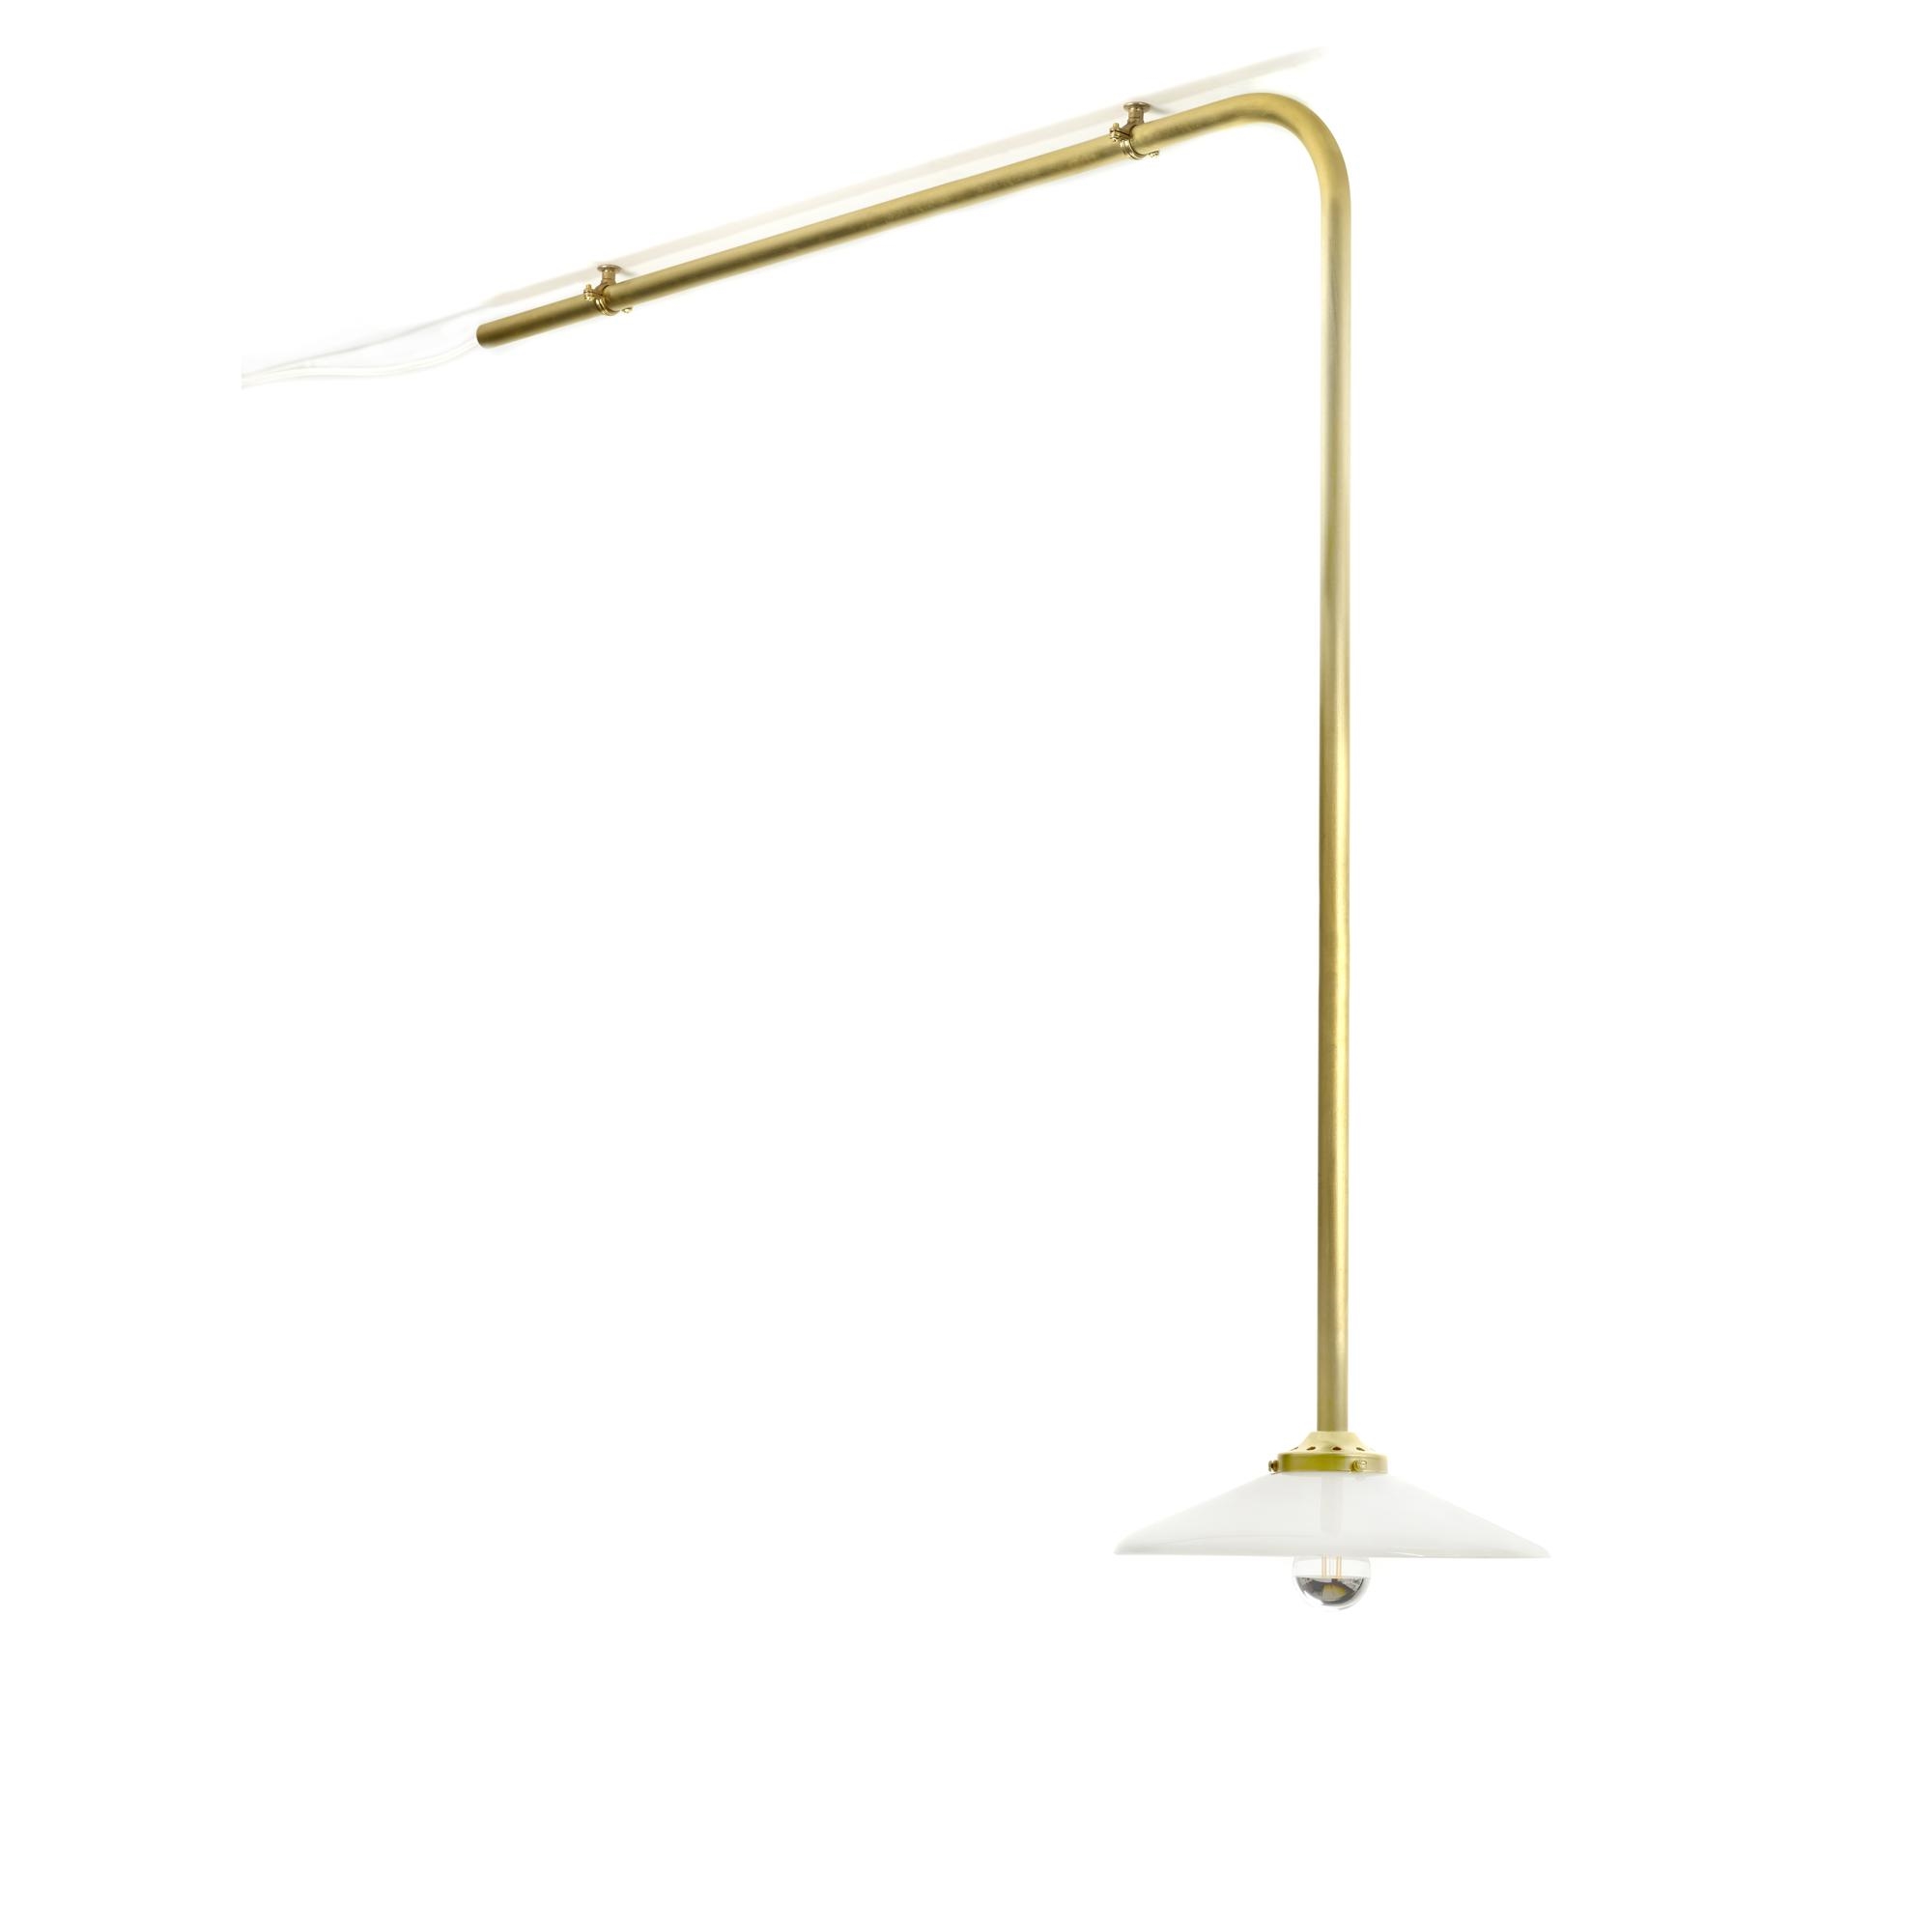 Valerie Objects Ceiling Lamp N°1 Lampa Sufitowa Mosi??ny